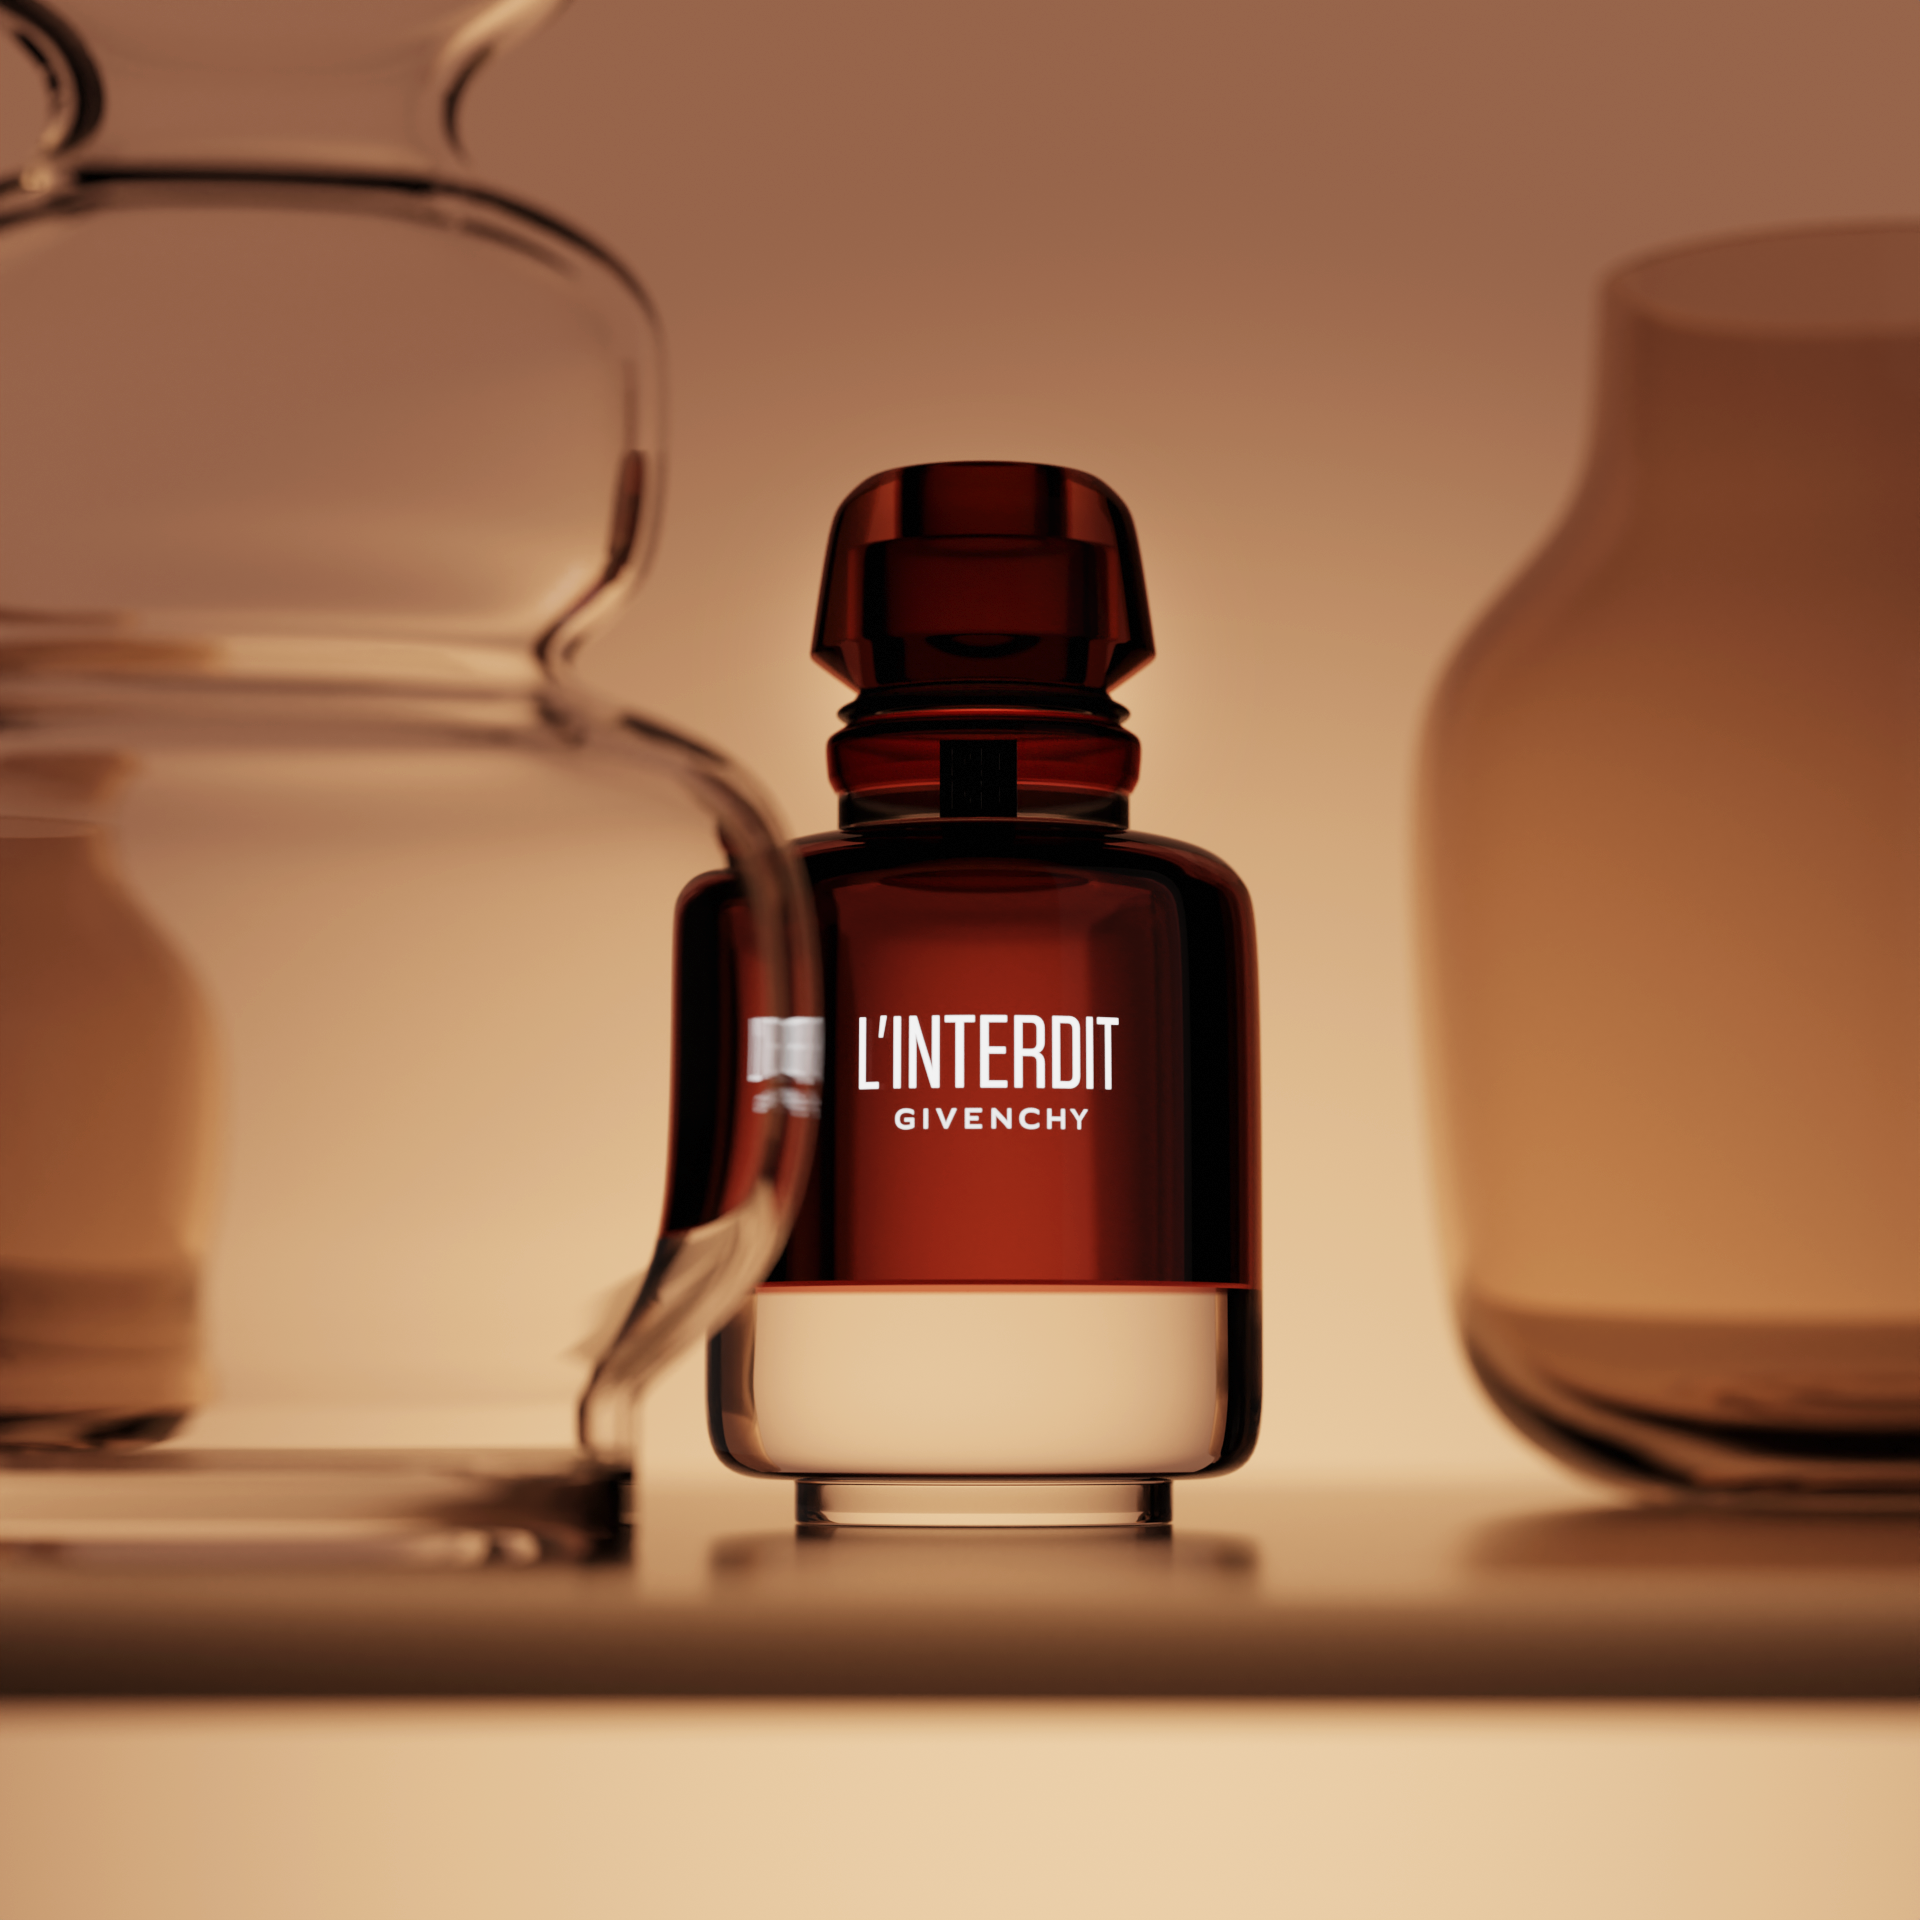 A close-up CGI shot of a Givenchy perfume bottle